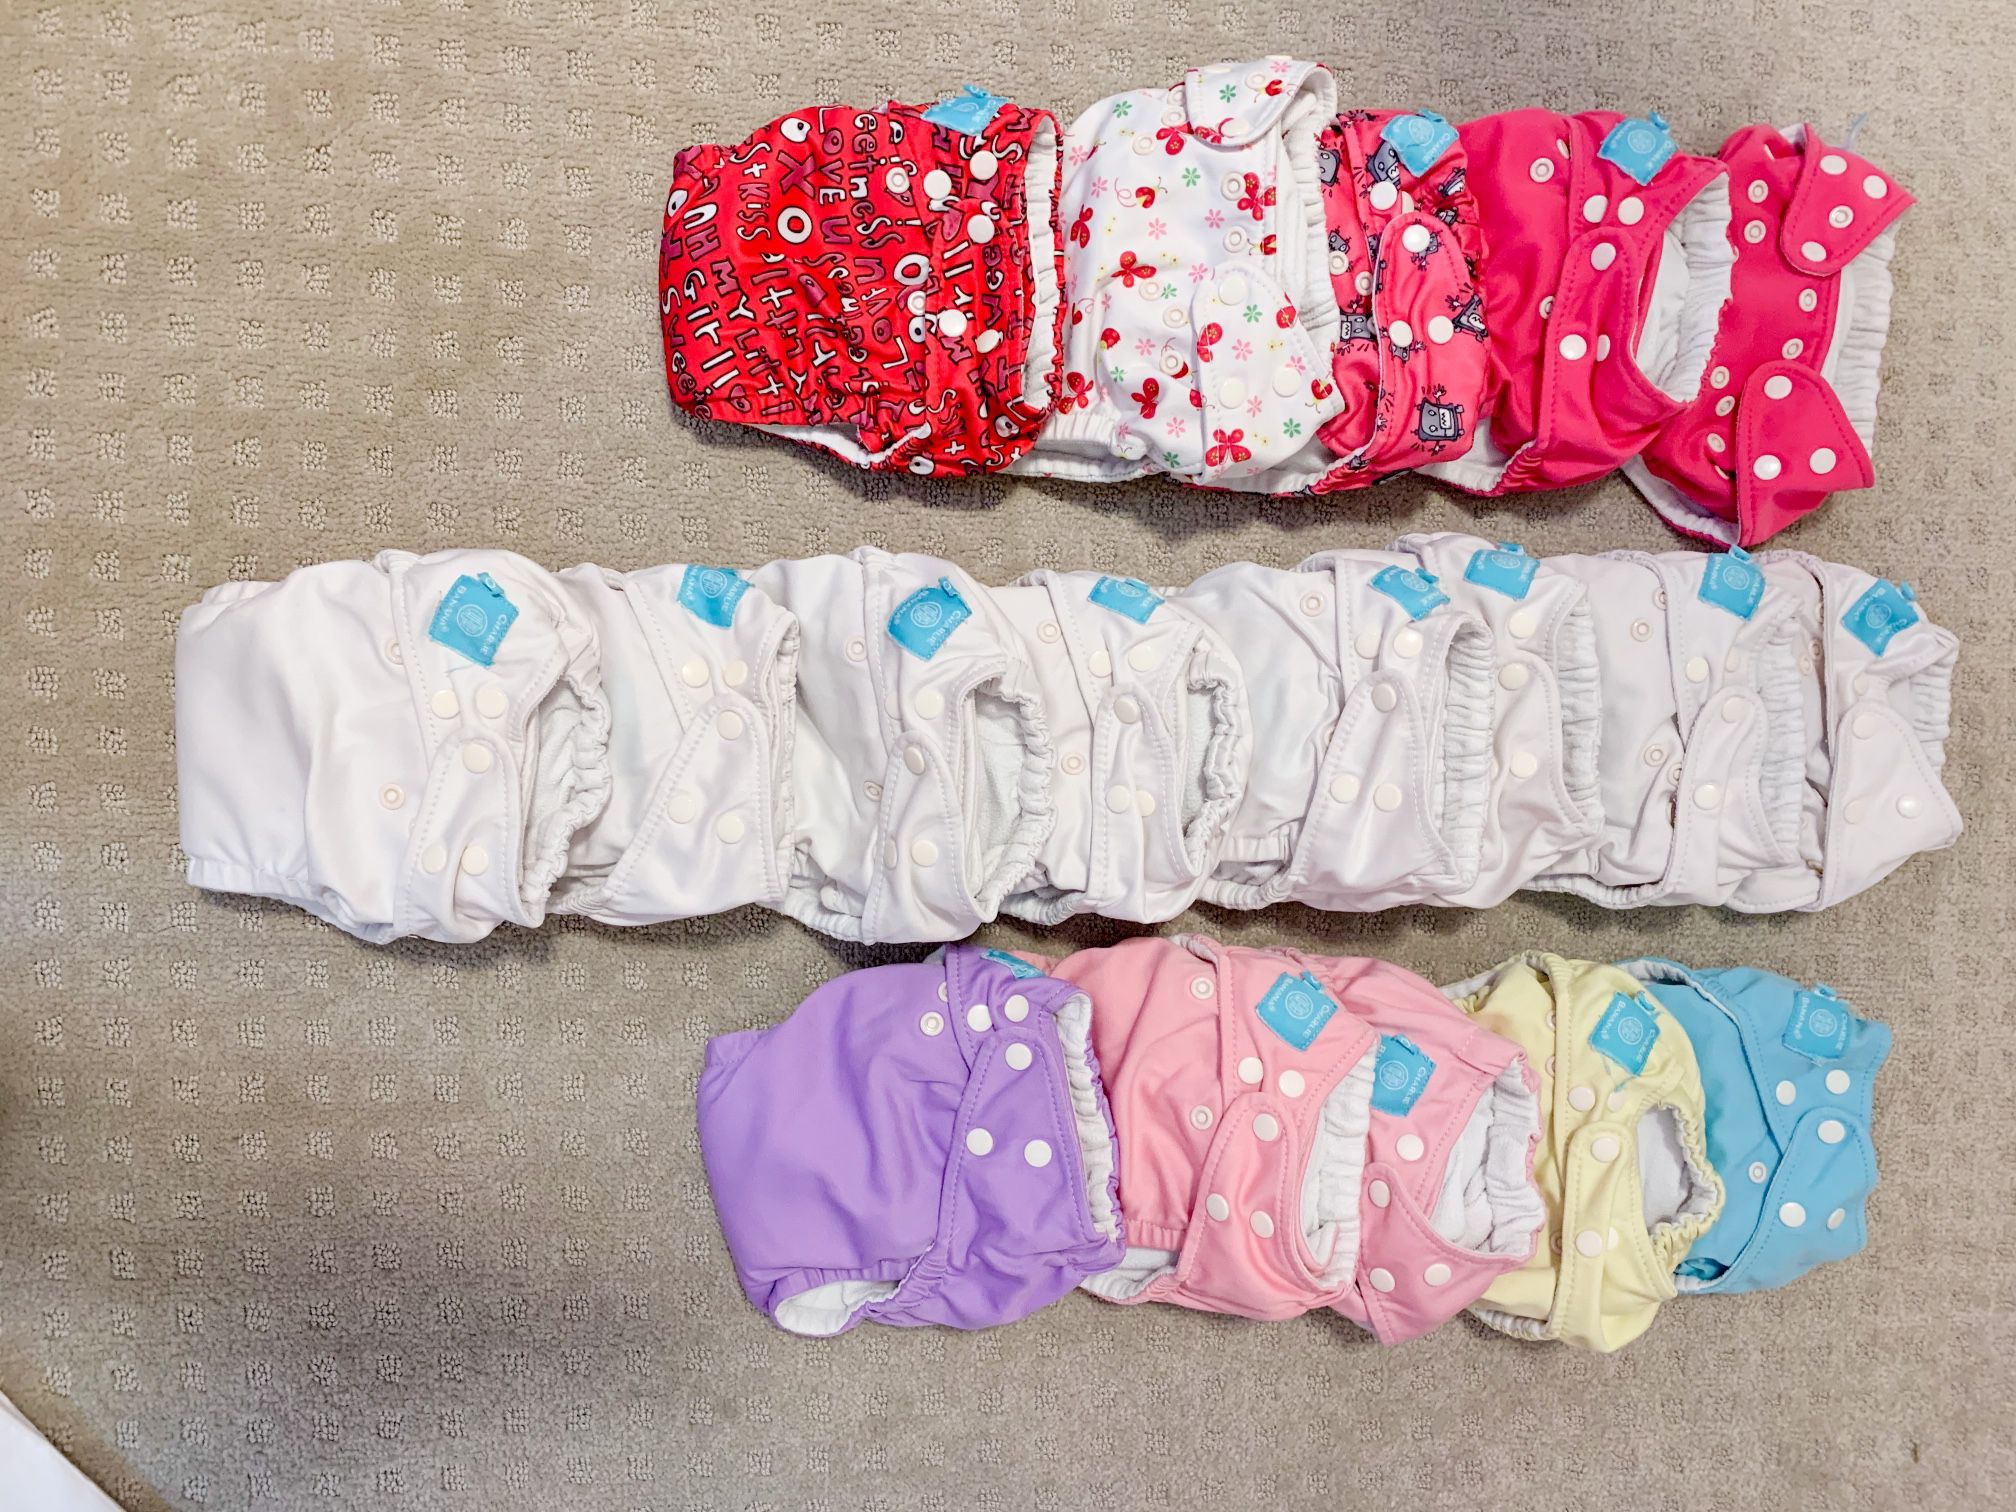 10 Charlie Banana Cloth Diapers In Excellent Condition